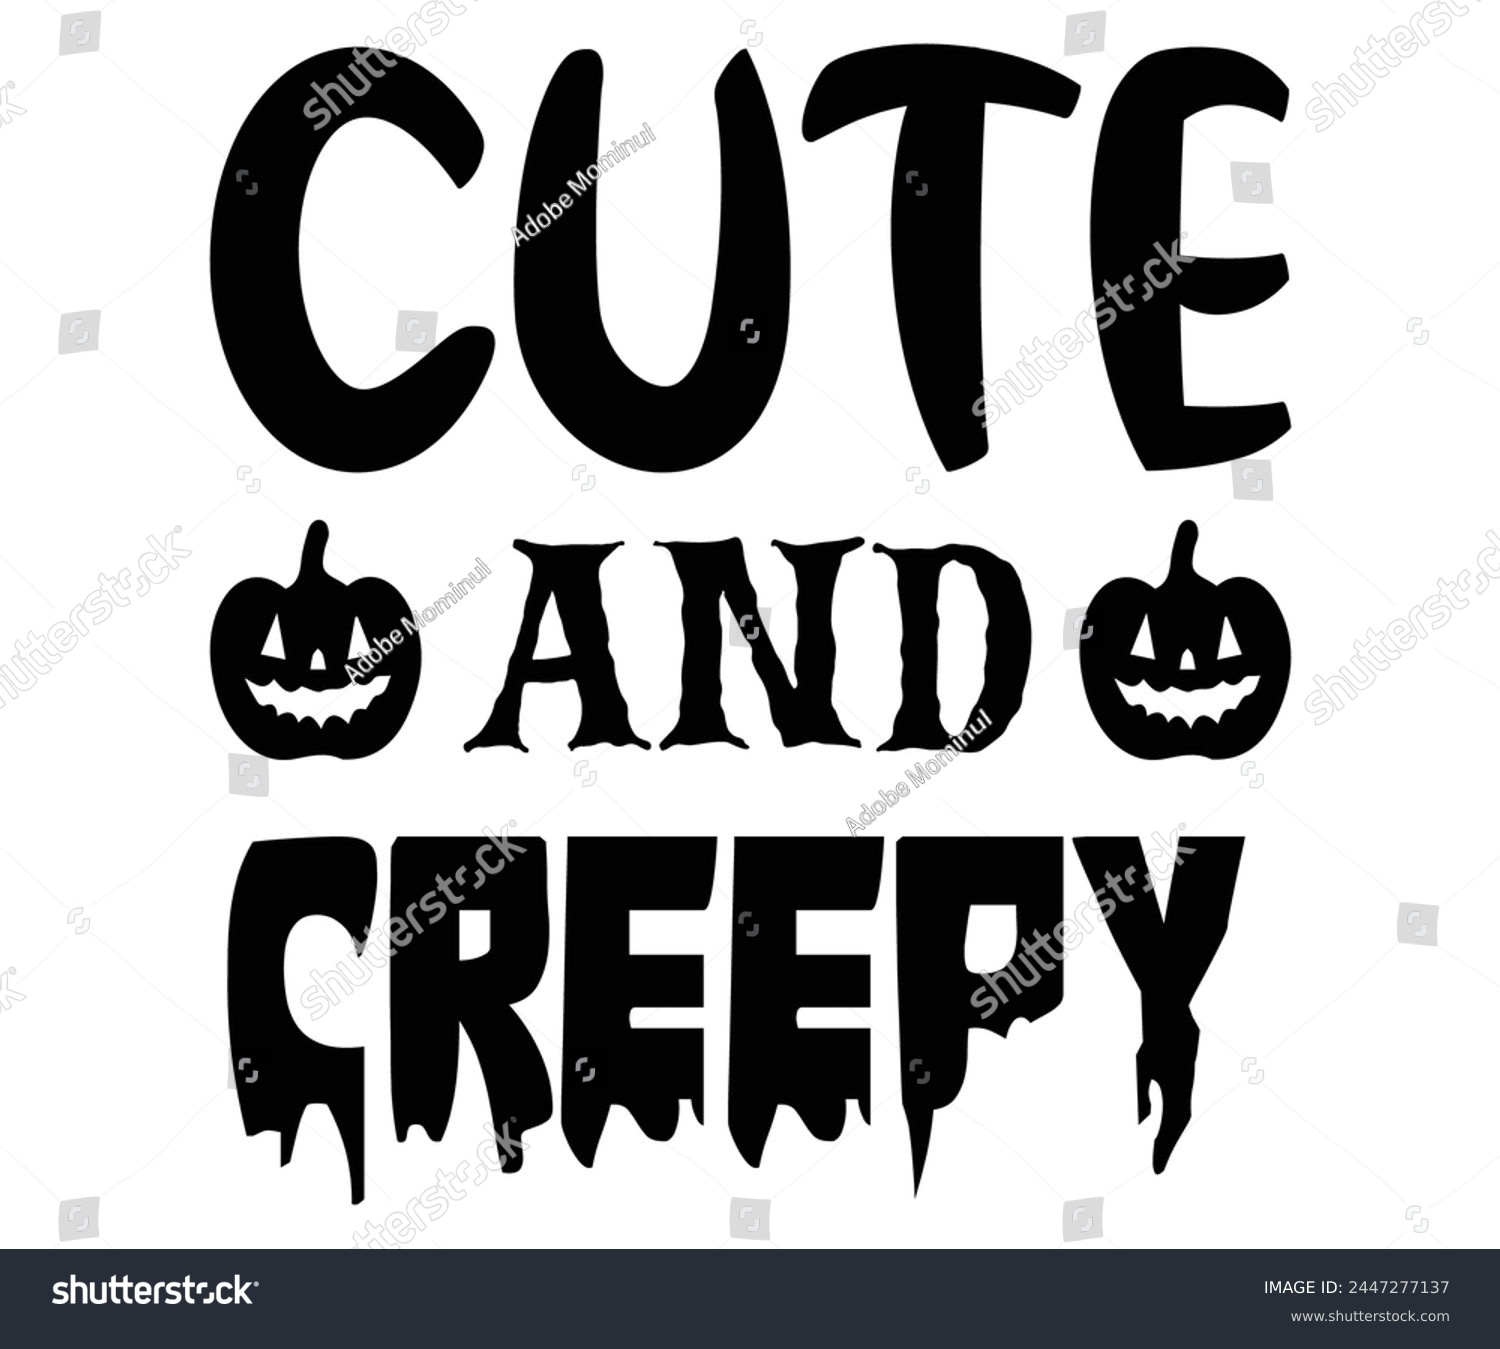 SVG of Cute And Creepy,Halloween Svg,Typography,Halloween Quotes,Witches Svg,Halloween Party,Halloween Costume,Halloween Gift,Funny Halloween,Spooky Svg,Funny T shirt,Ghost Svg,Cut file svg